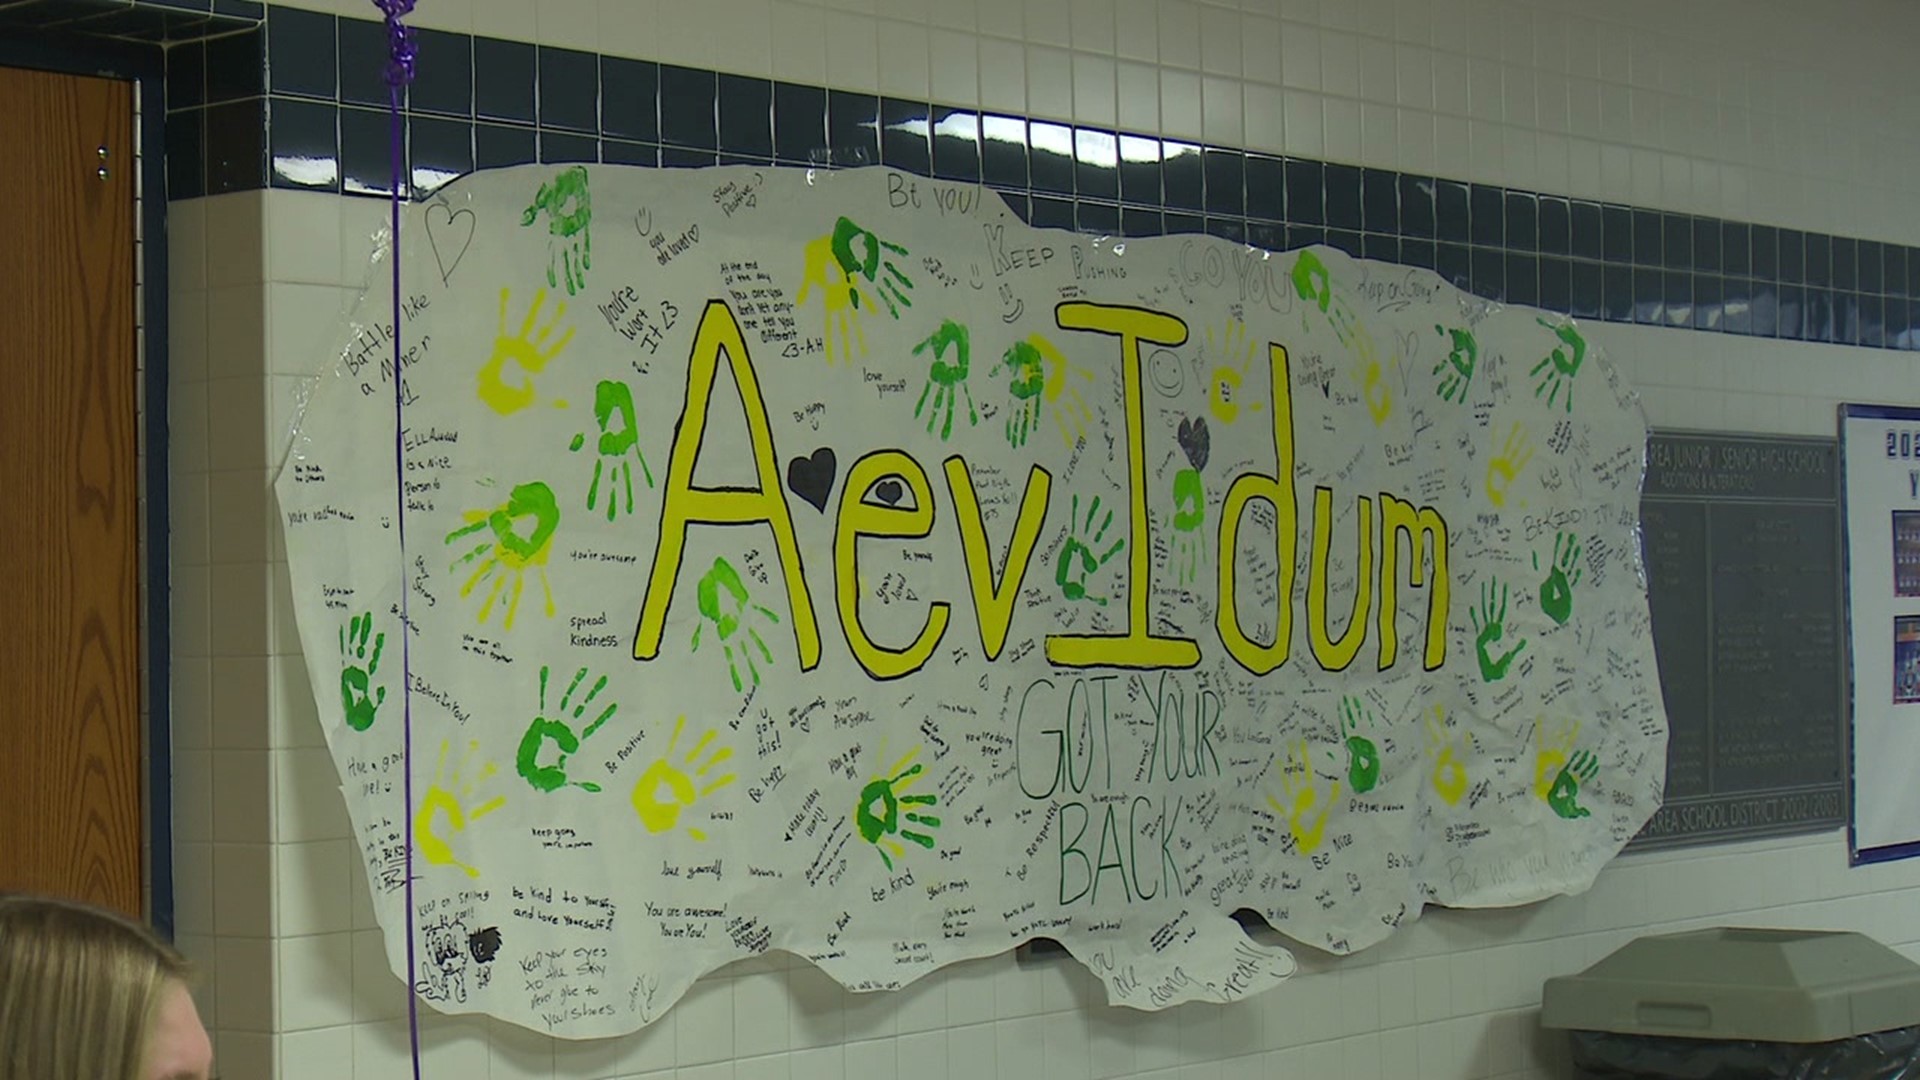 Students in part of Schuylkill County came together after tragedy. They're breaking down barriers when it comes to mental health awareness.